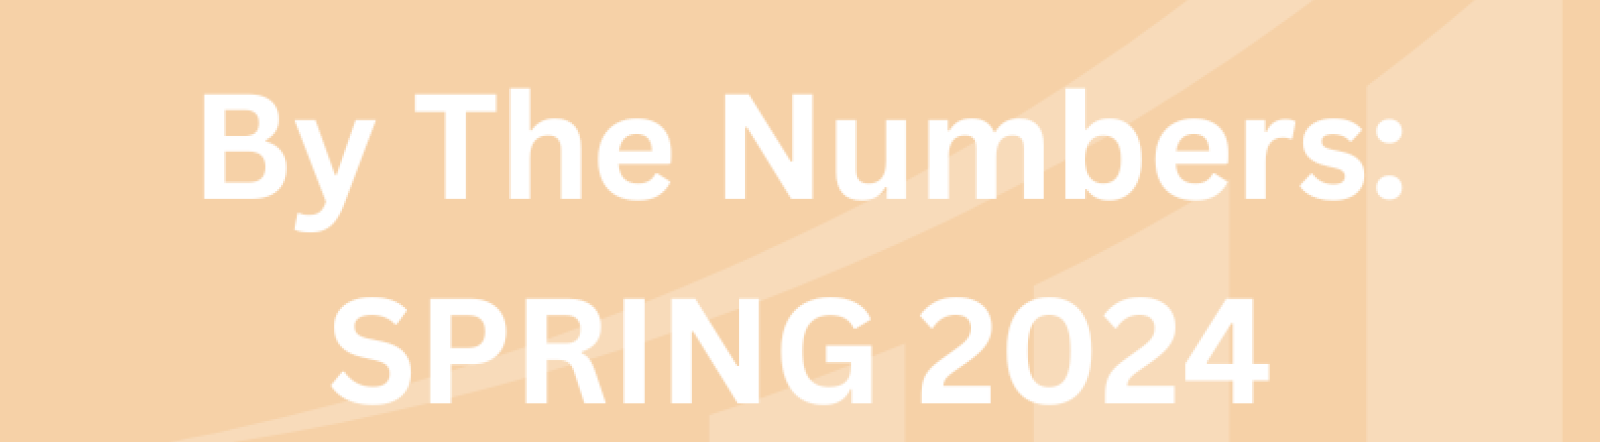 by the numbers spring 2024